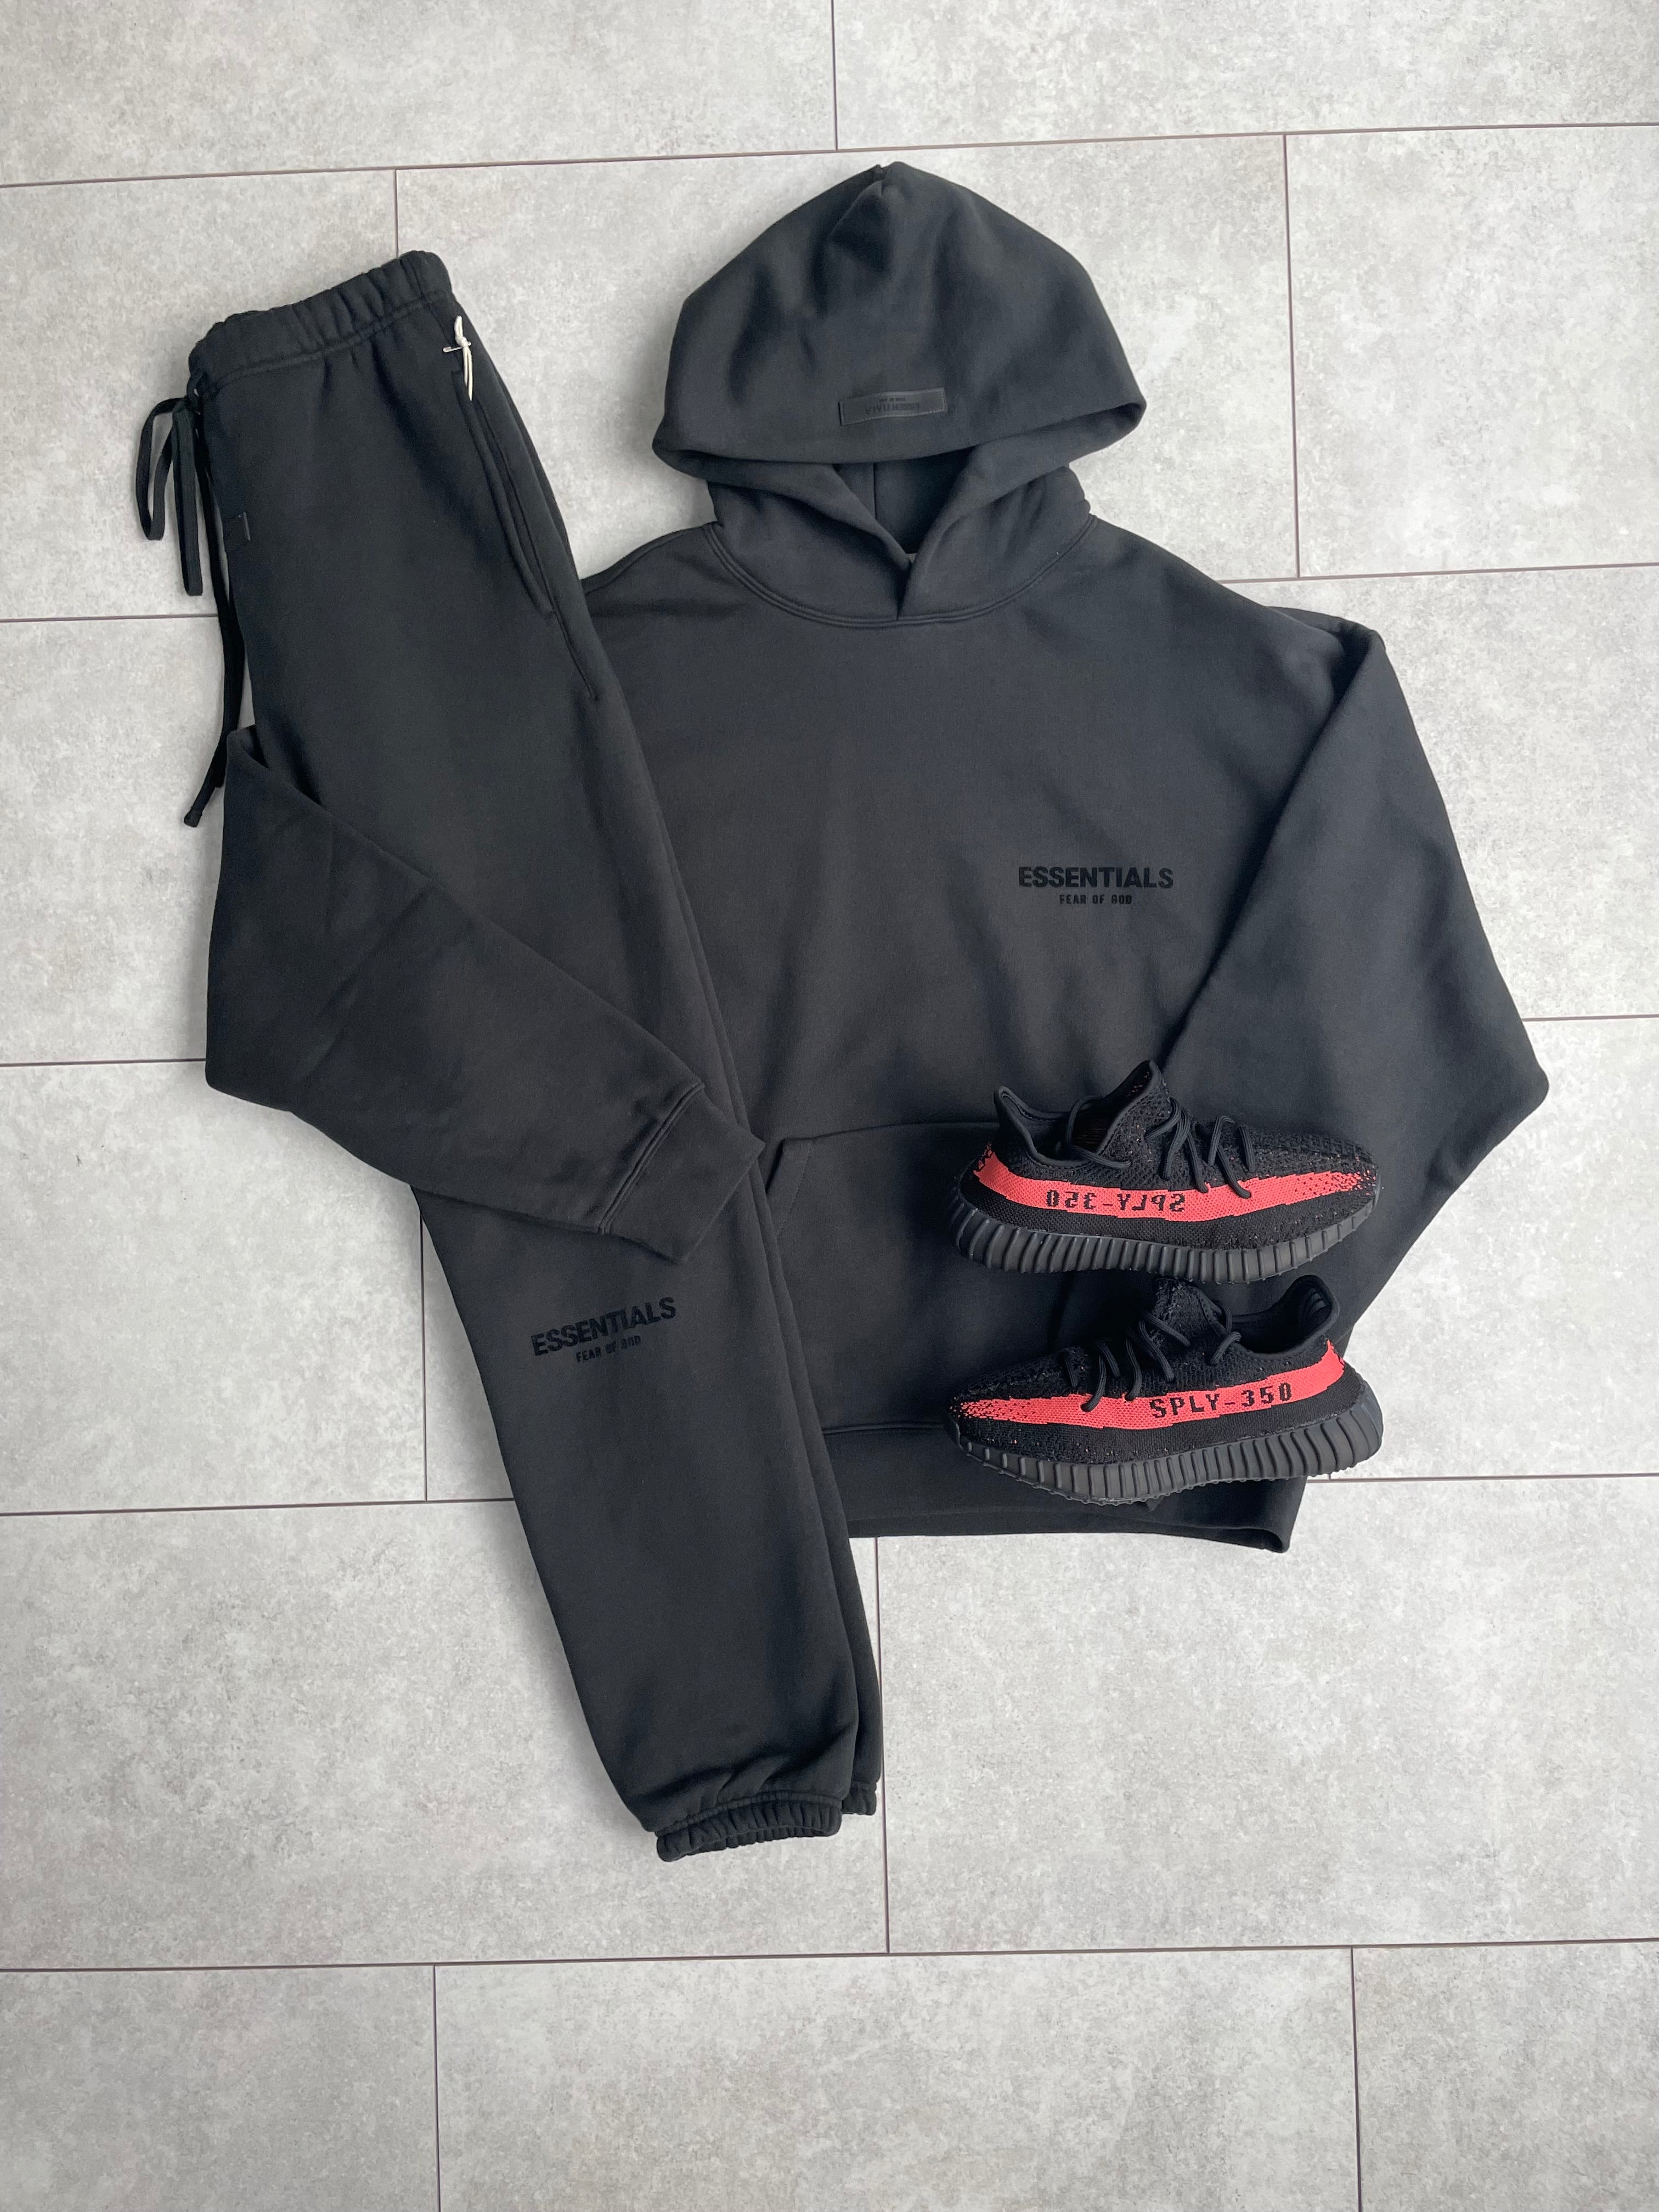 Fear of God Essentials Tracksuit 'Black' (SS22)